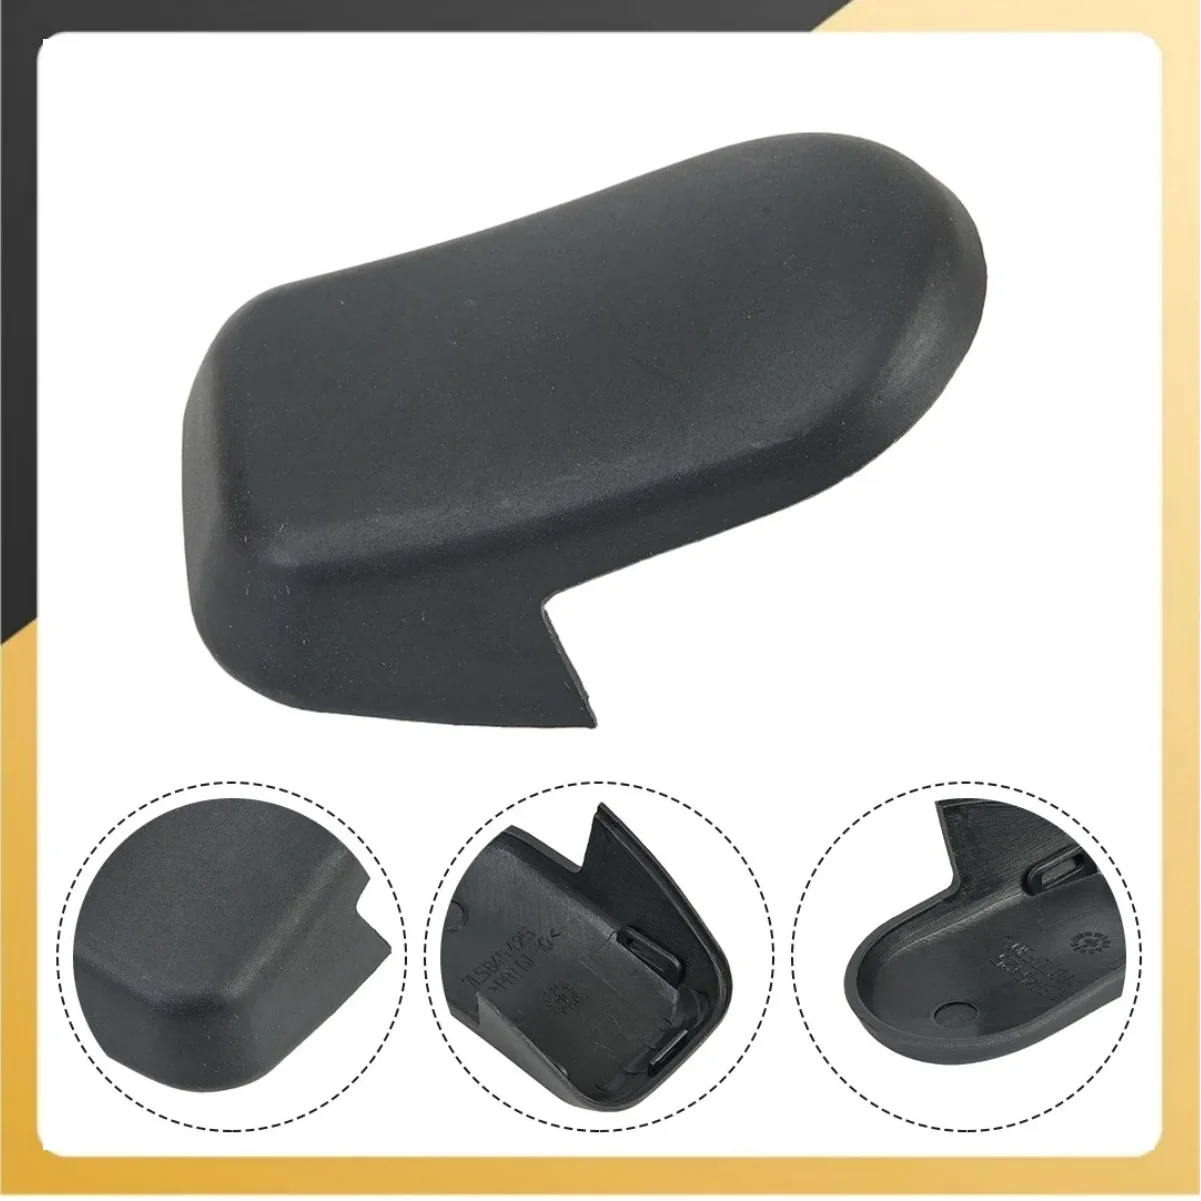 

1x Car Rear Washer Windshield Wiper Arm Cover Cap For 2003-2010 95562832002 Replace Automobiles Parts